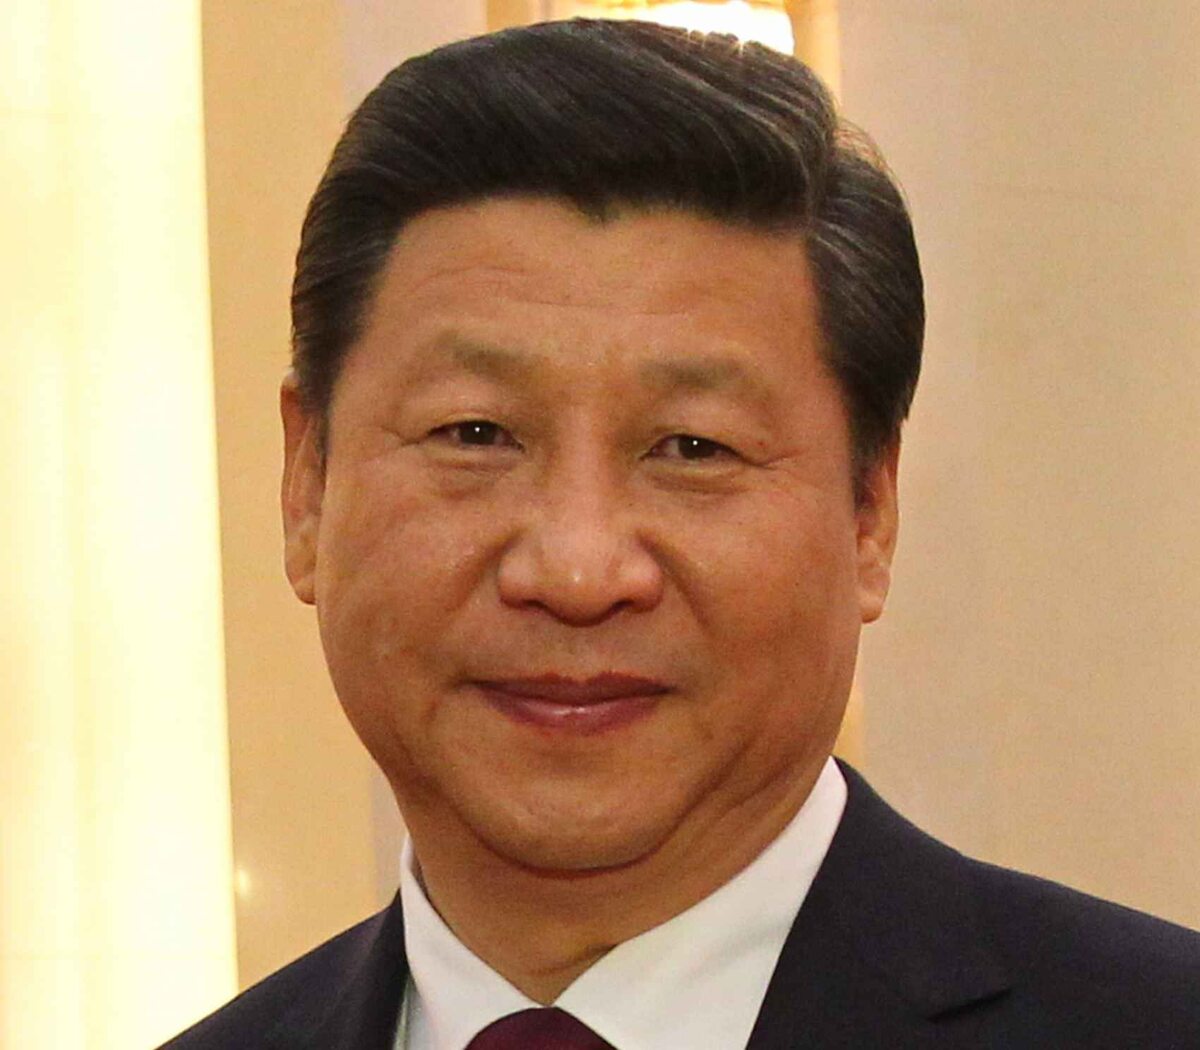 Xi Jinping (fot.By Antilong (Own work) [CC BY-SA 3.0 (http://creativecommons.org/licenses/by-sa/3.0)], via Wikimedia Commons)